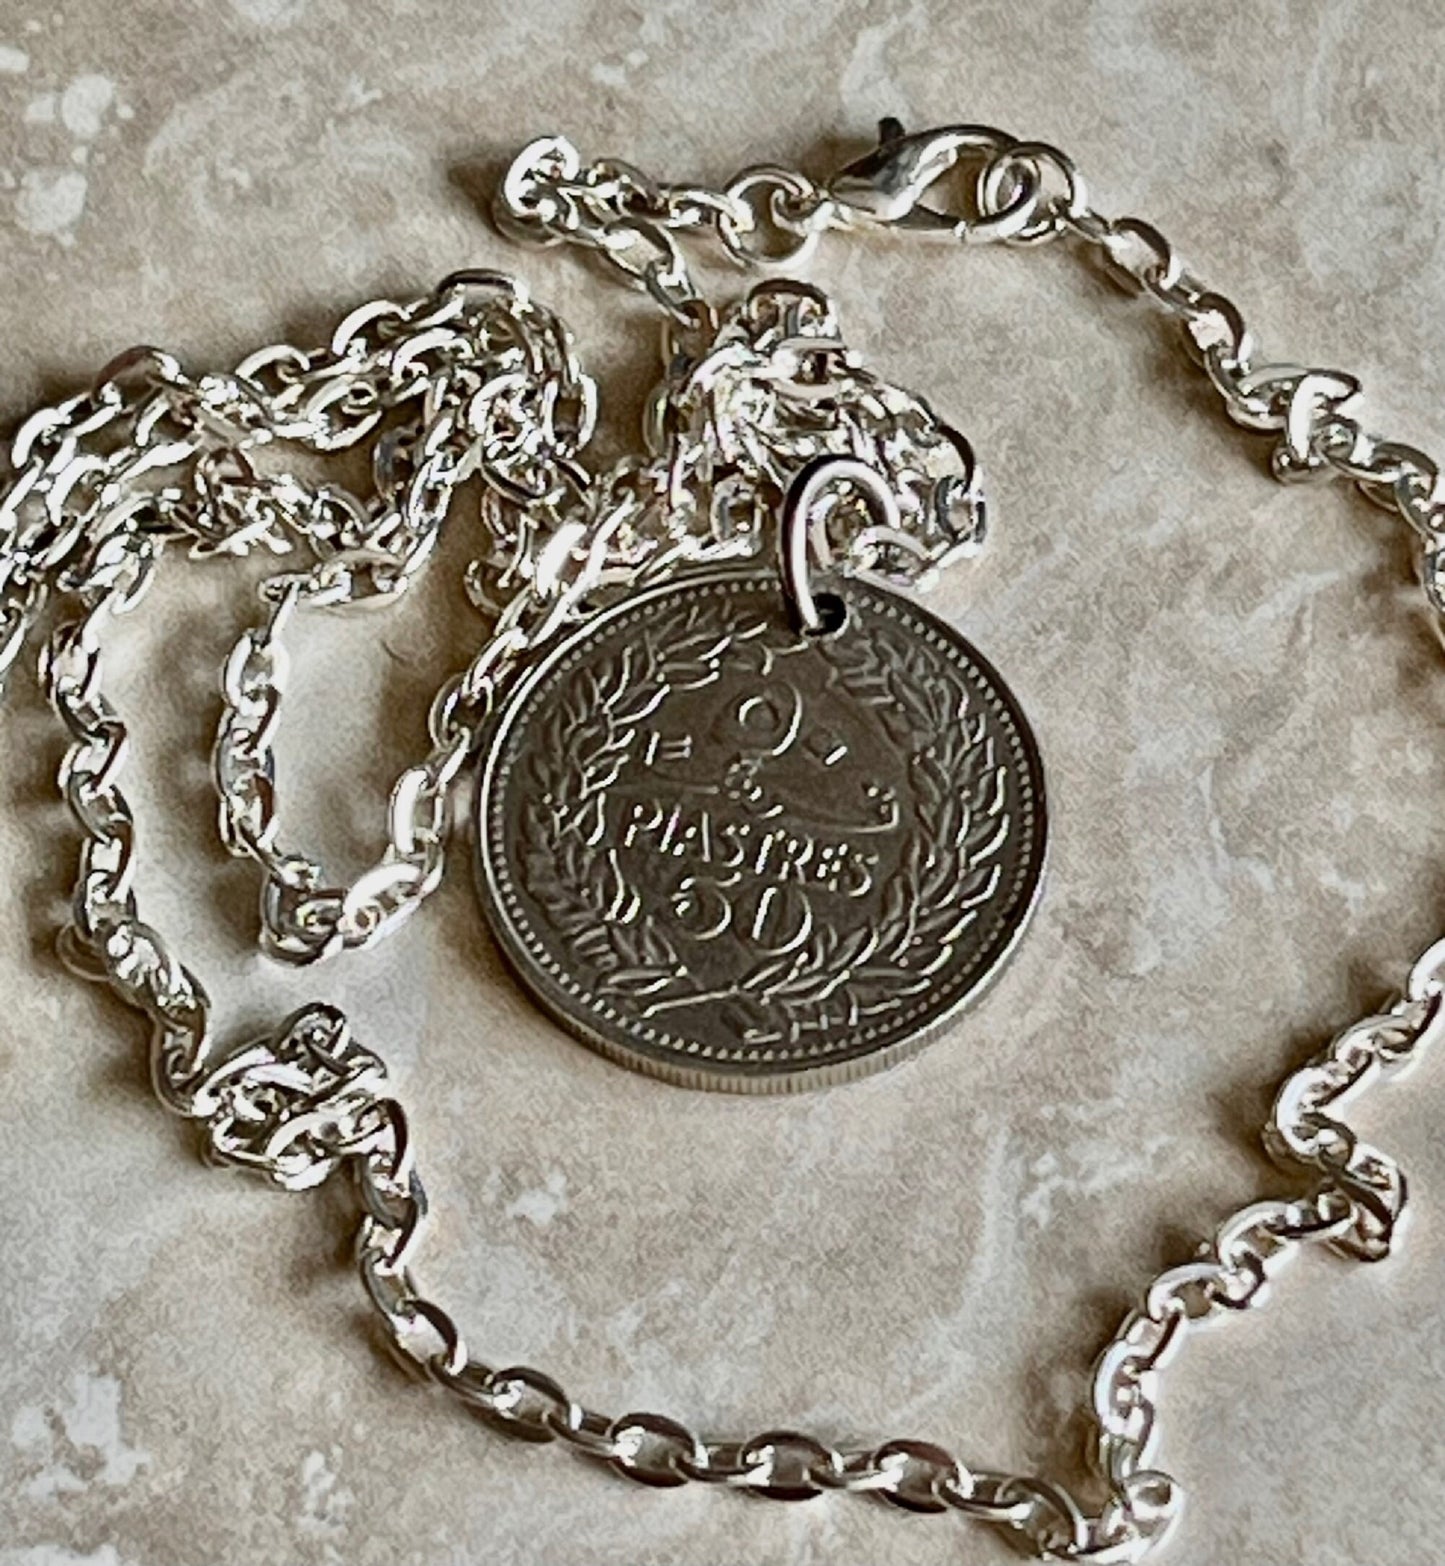 Libya Coin Pendant Libyan 50 Piastres Personal Necklace Old Vintage Handmade Jewelry Gift Friend Charm For Him Her World Coin Collector